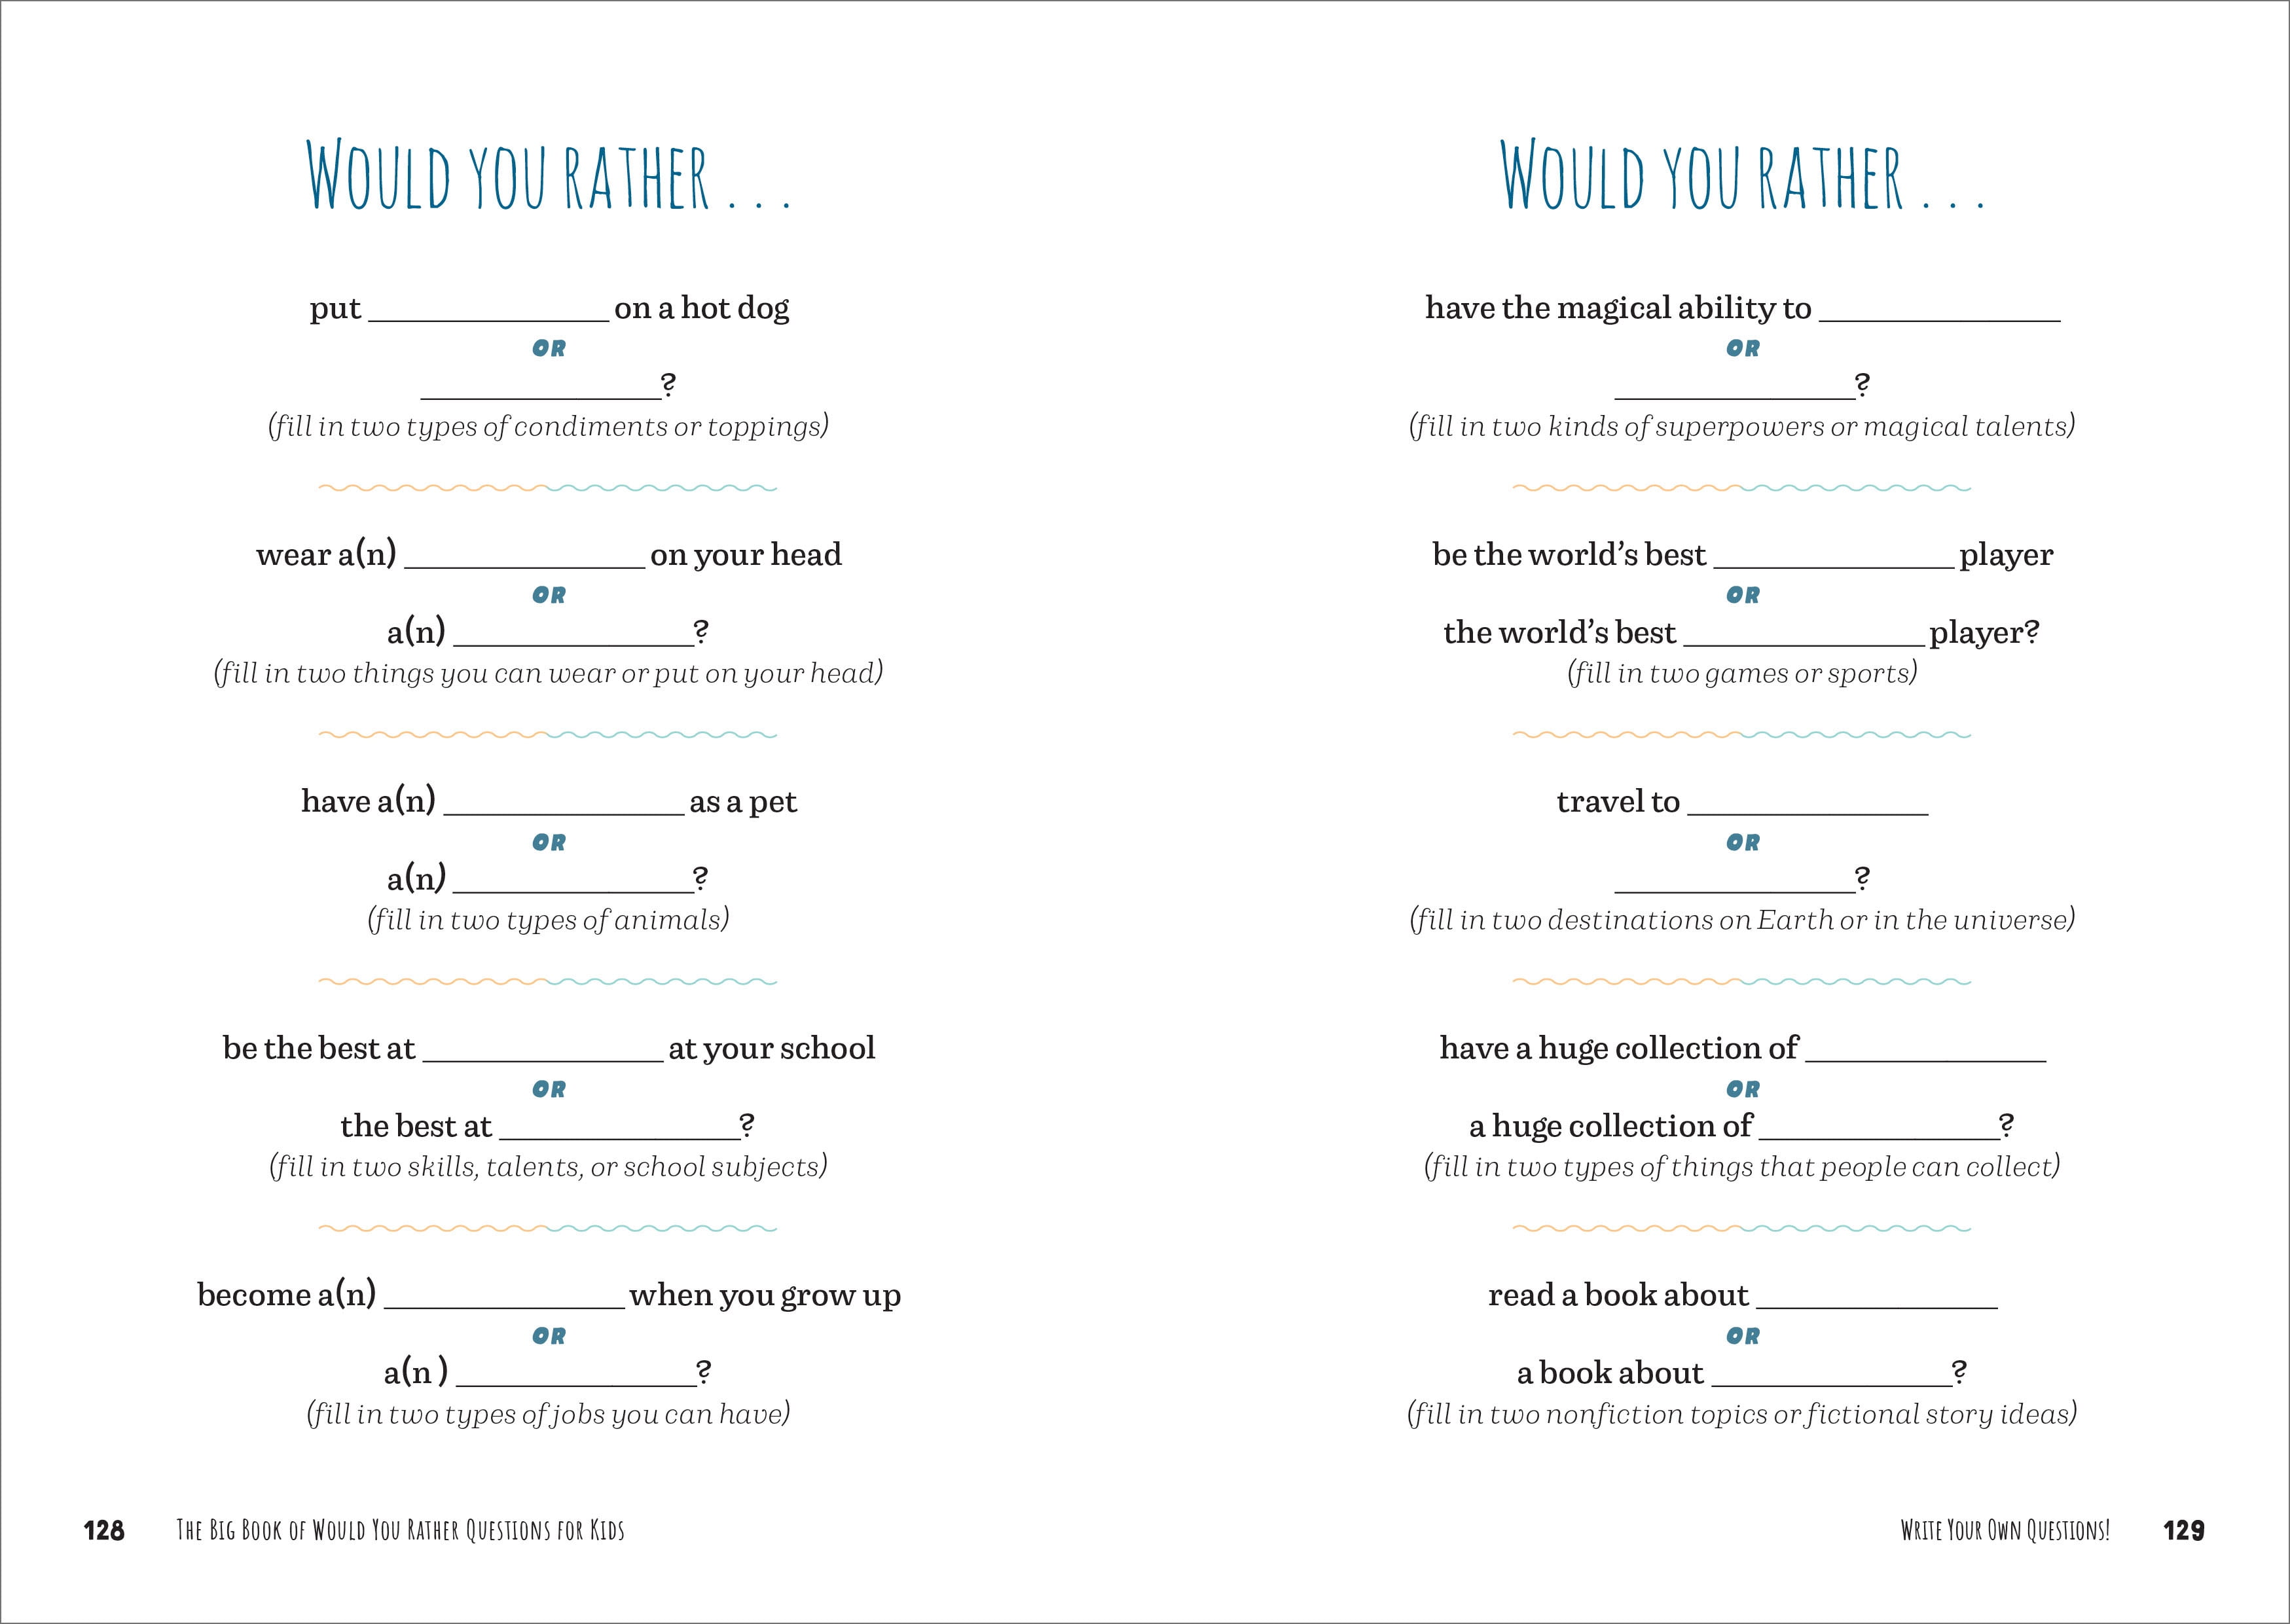 The Big Book of Would You Rather Questions for Kids, Book by Kevin Kurtz, Official Publisher Page